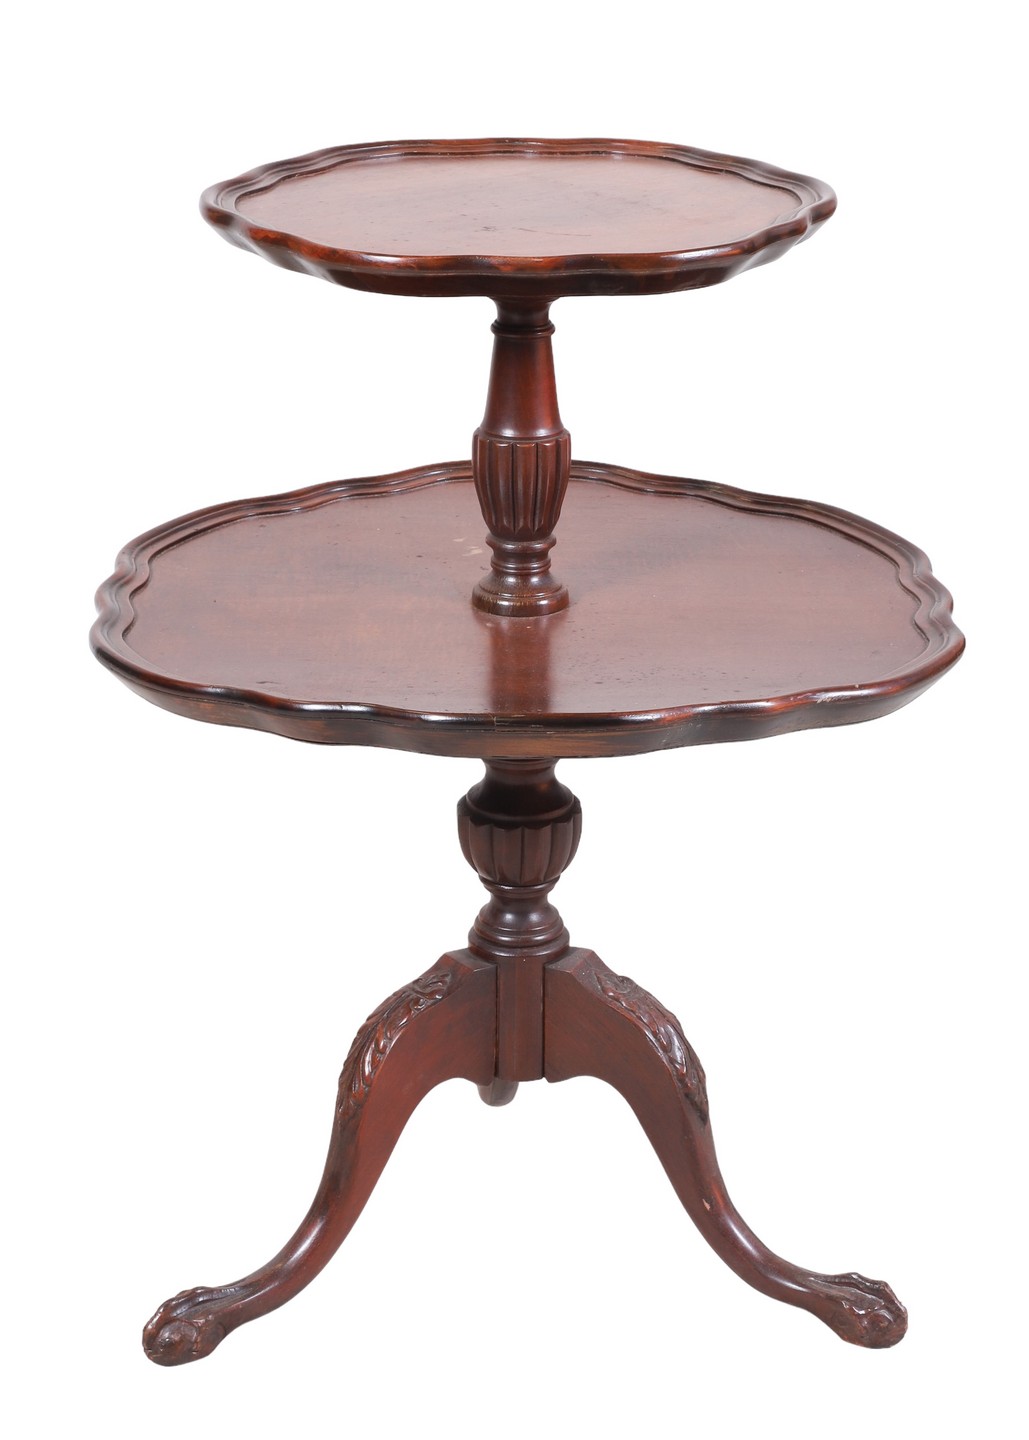 Chippendale style mahogany 2 tier 27a507